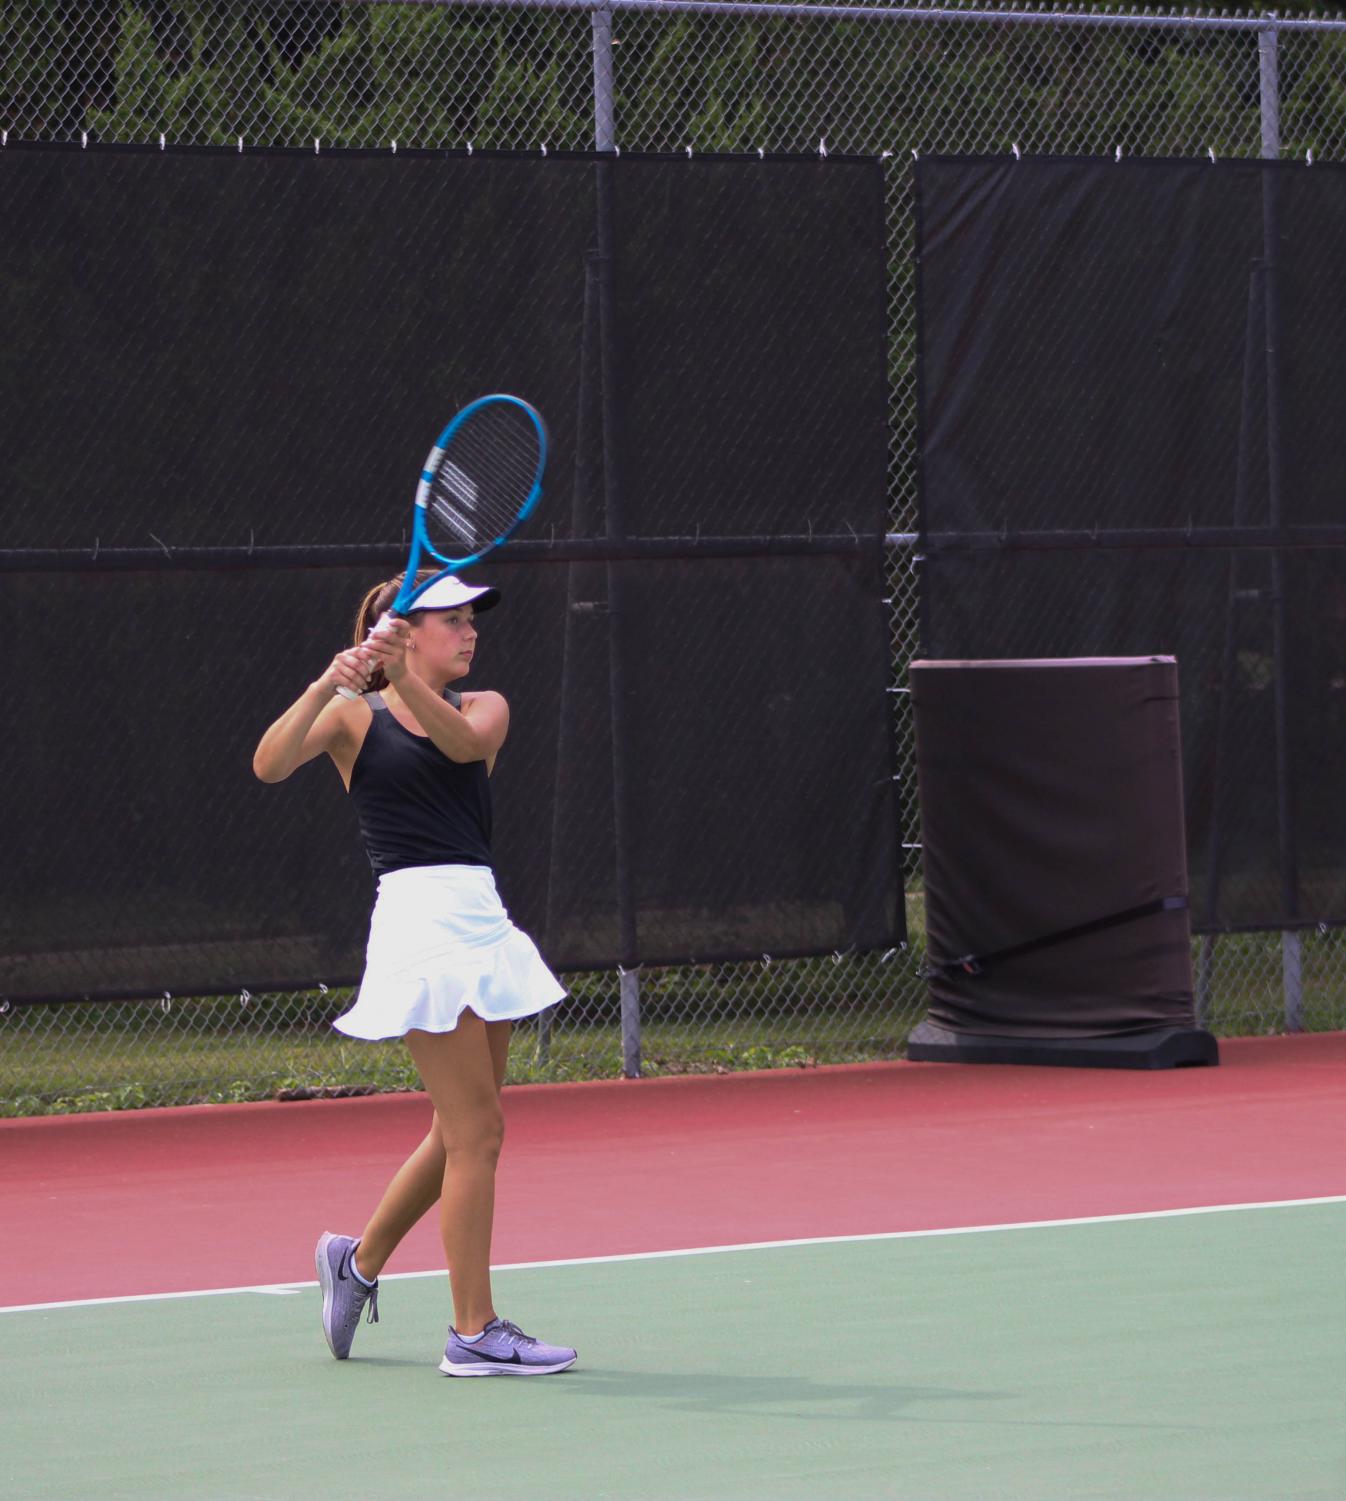 Girls+Varsity+Tennis+at+Kossover+Tennis+Center+9%2F22+%28Photos+by+Kiley+Hale%29